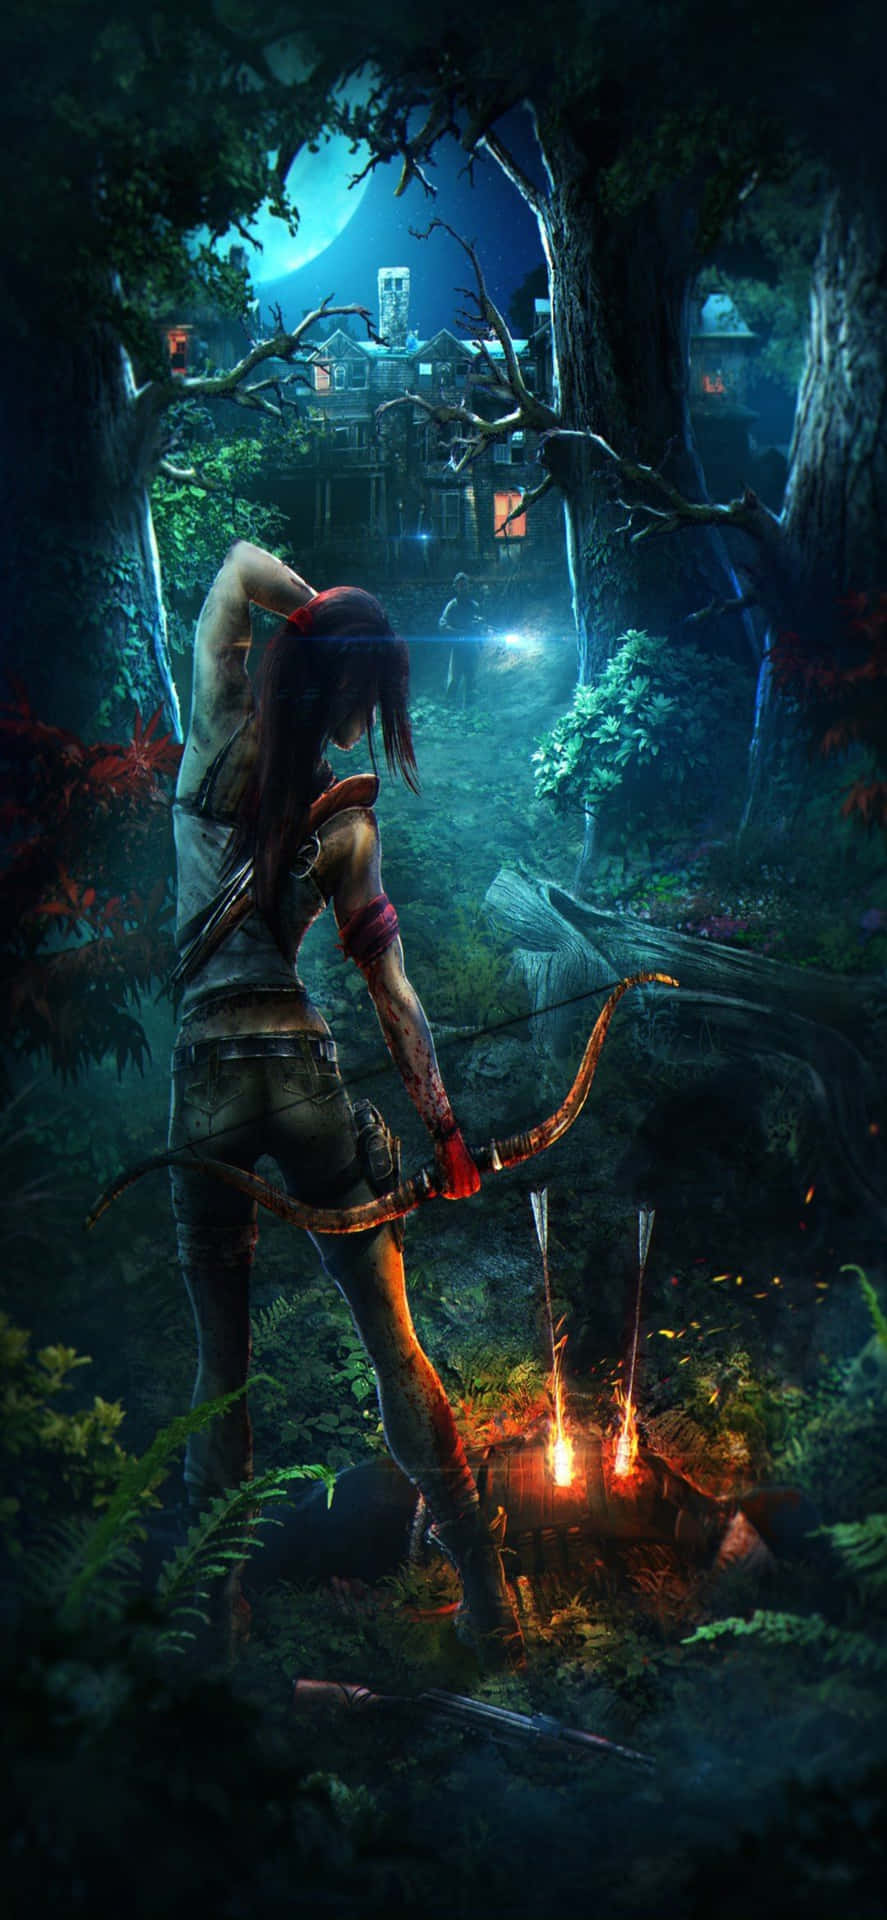 The Tomb Raider - A Woman In A Forest